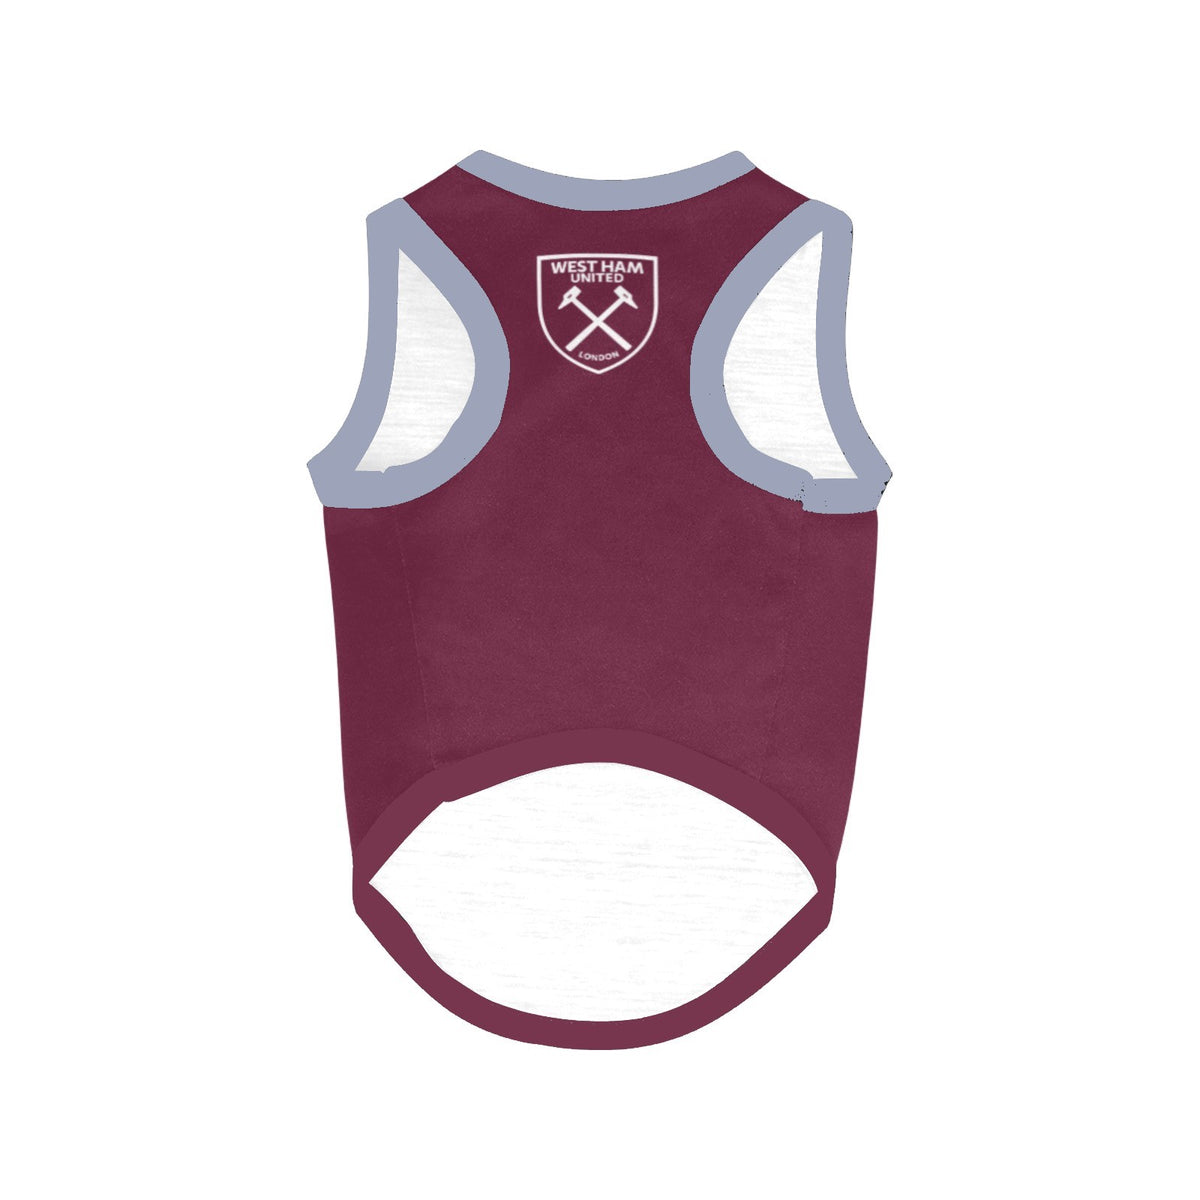 West Ham United FC Inspired Personalized Jersey Tank